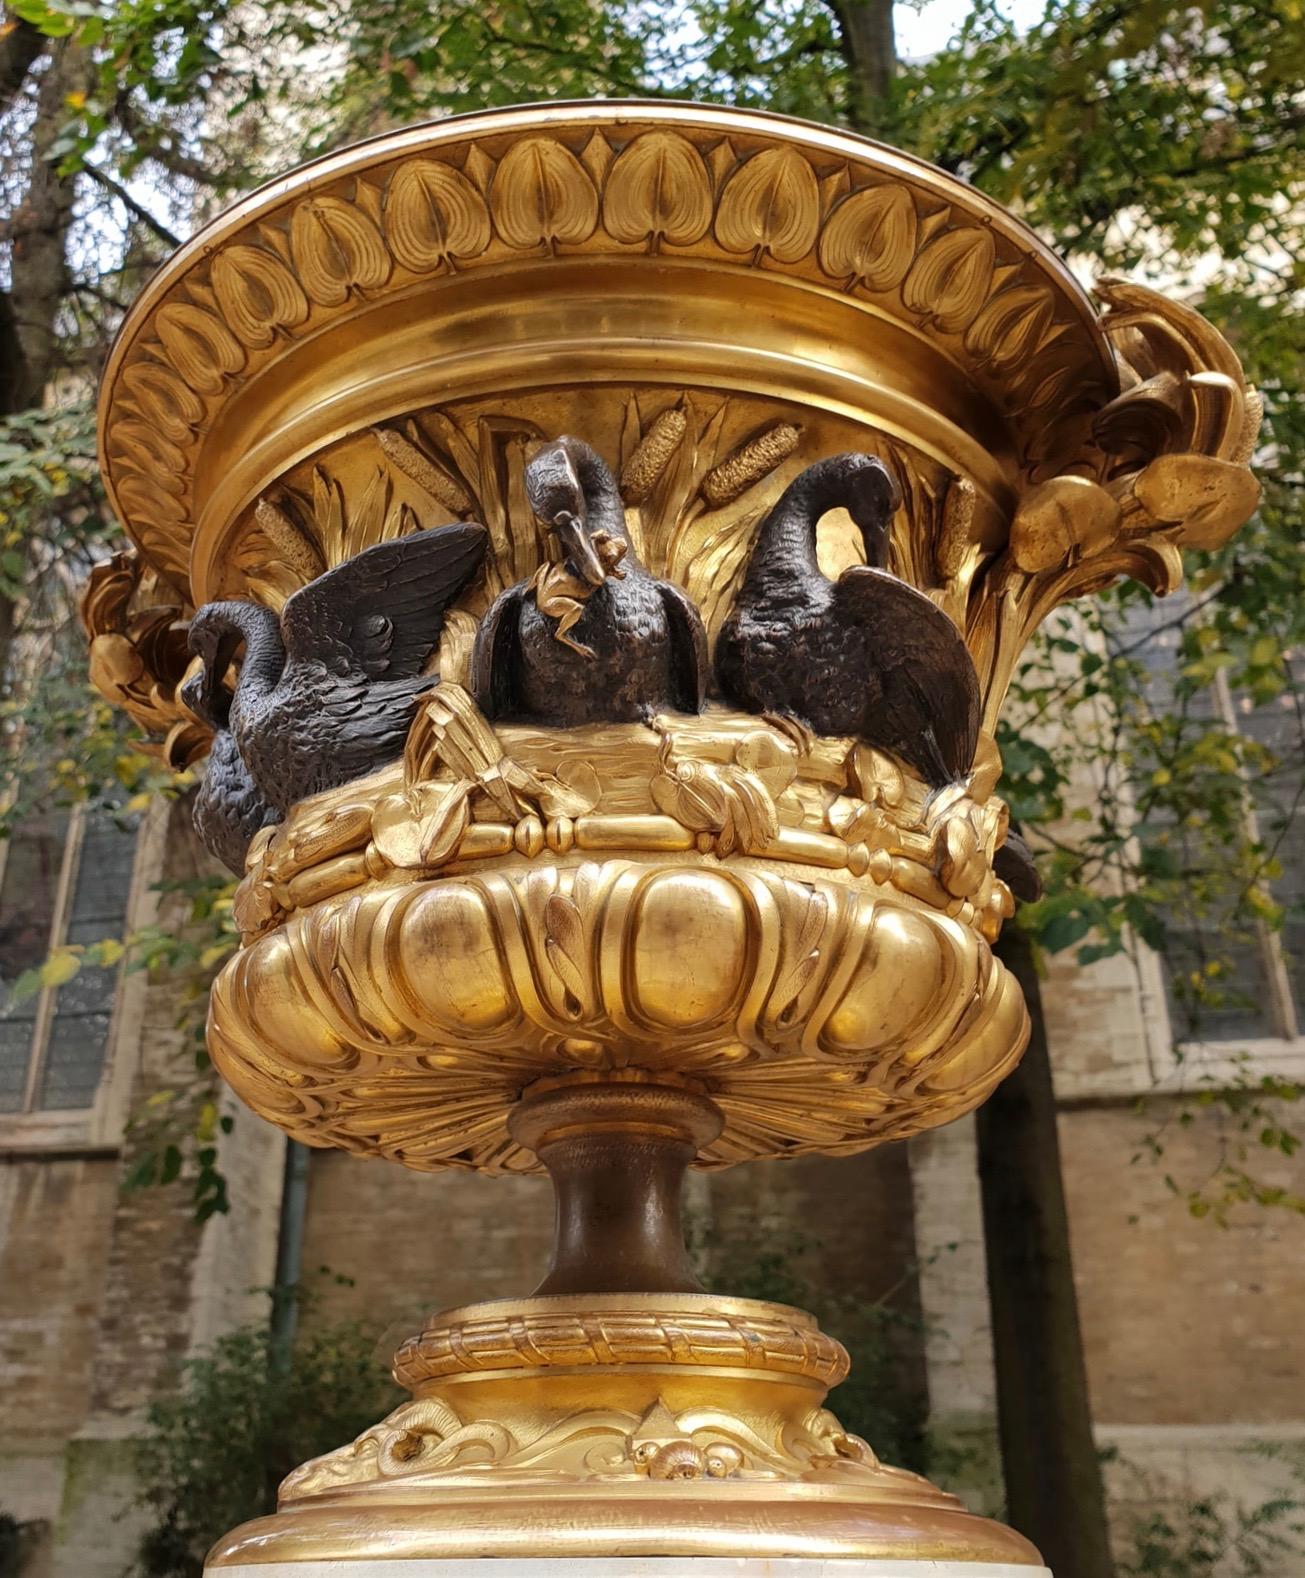 An impressive ormolu ornamental vase centerpiece of campana shape, the bronze vessel resting on a moulded concave agate stone pediment with byzantine cross shaped base.
The gilt concave foot of the vase shows ram’s heads intertwined with scrolls